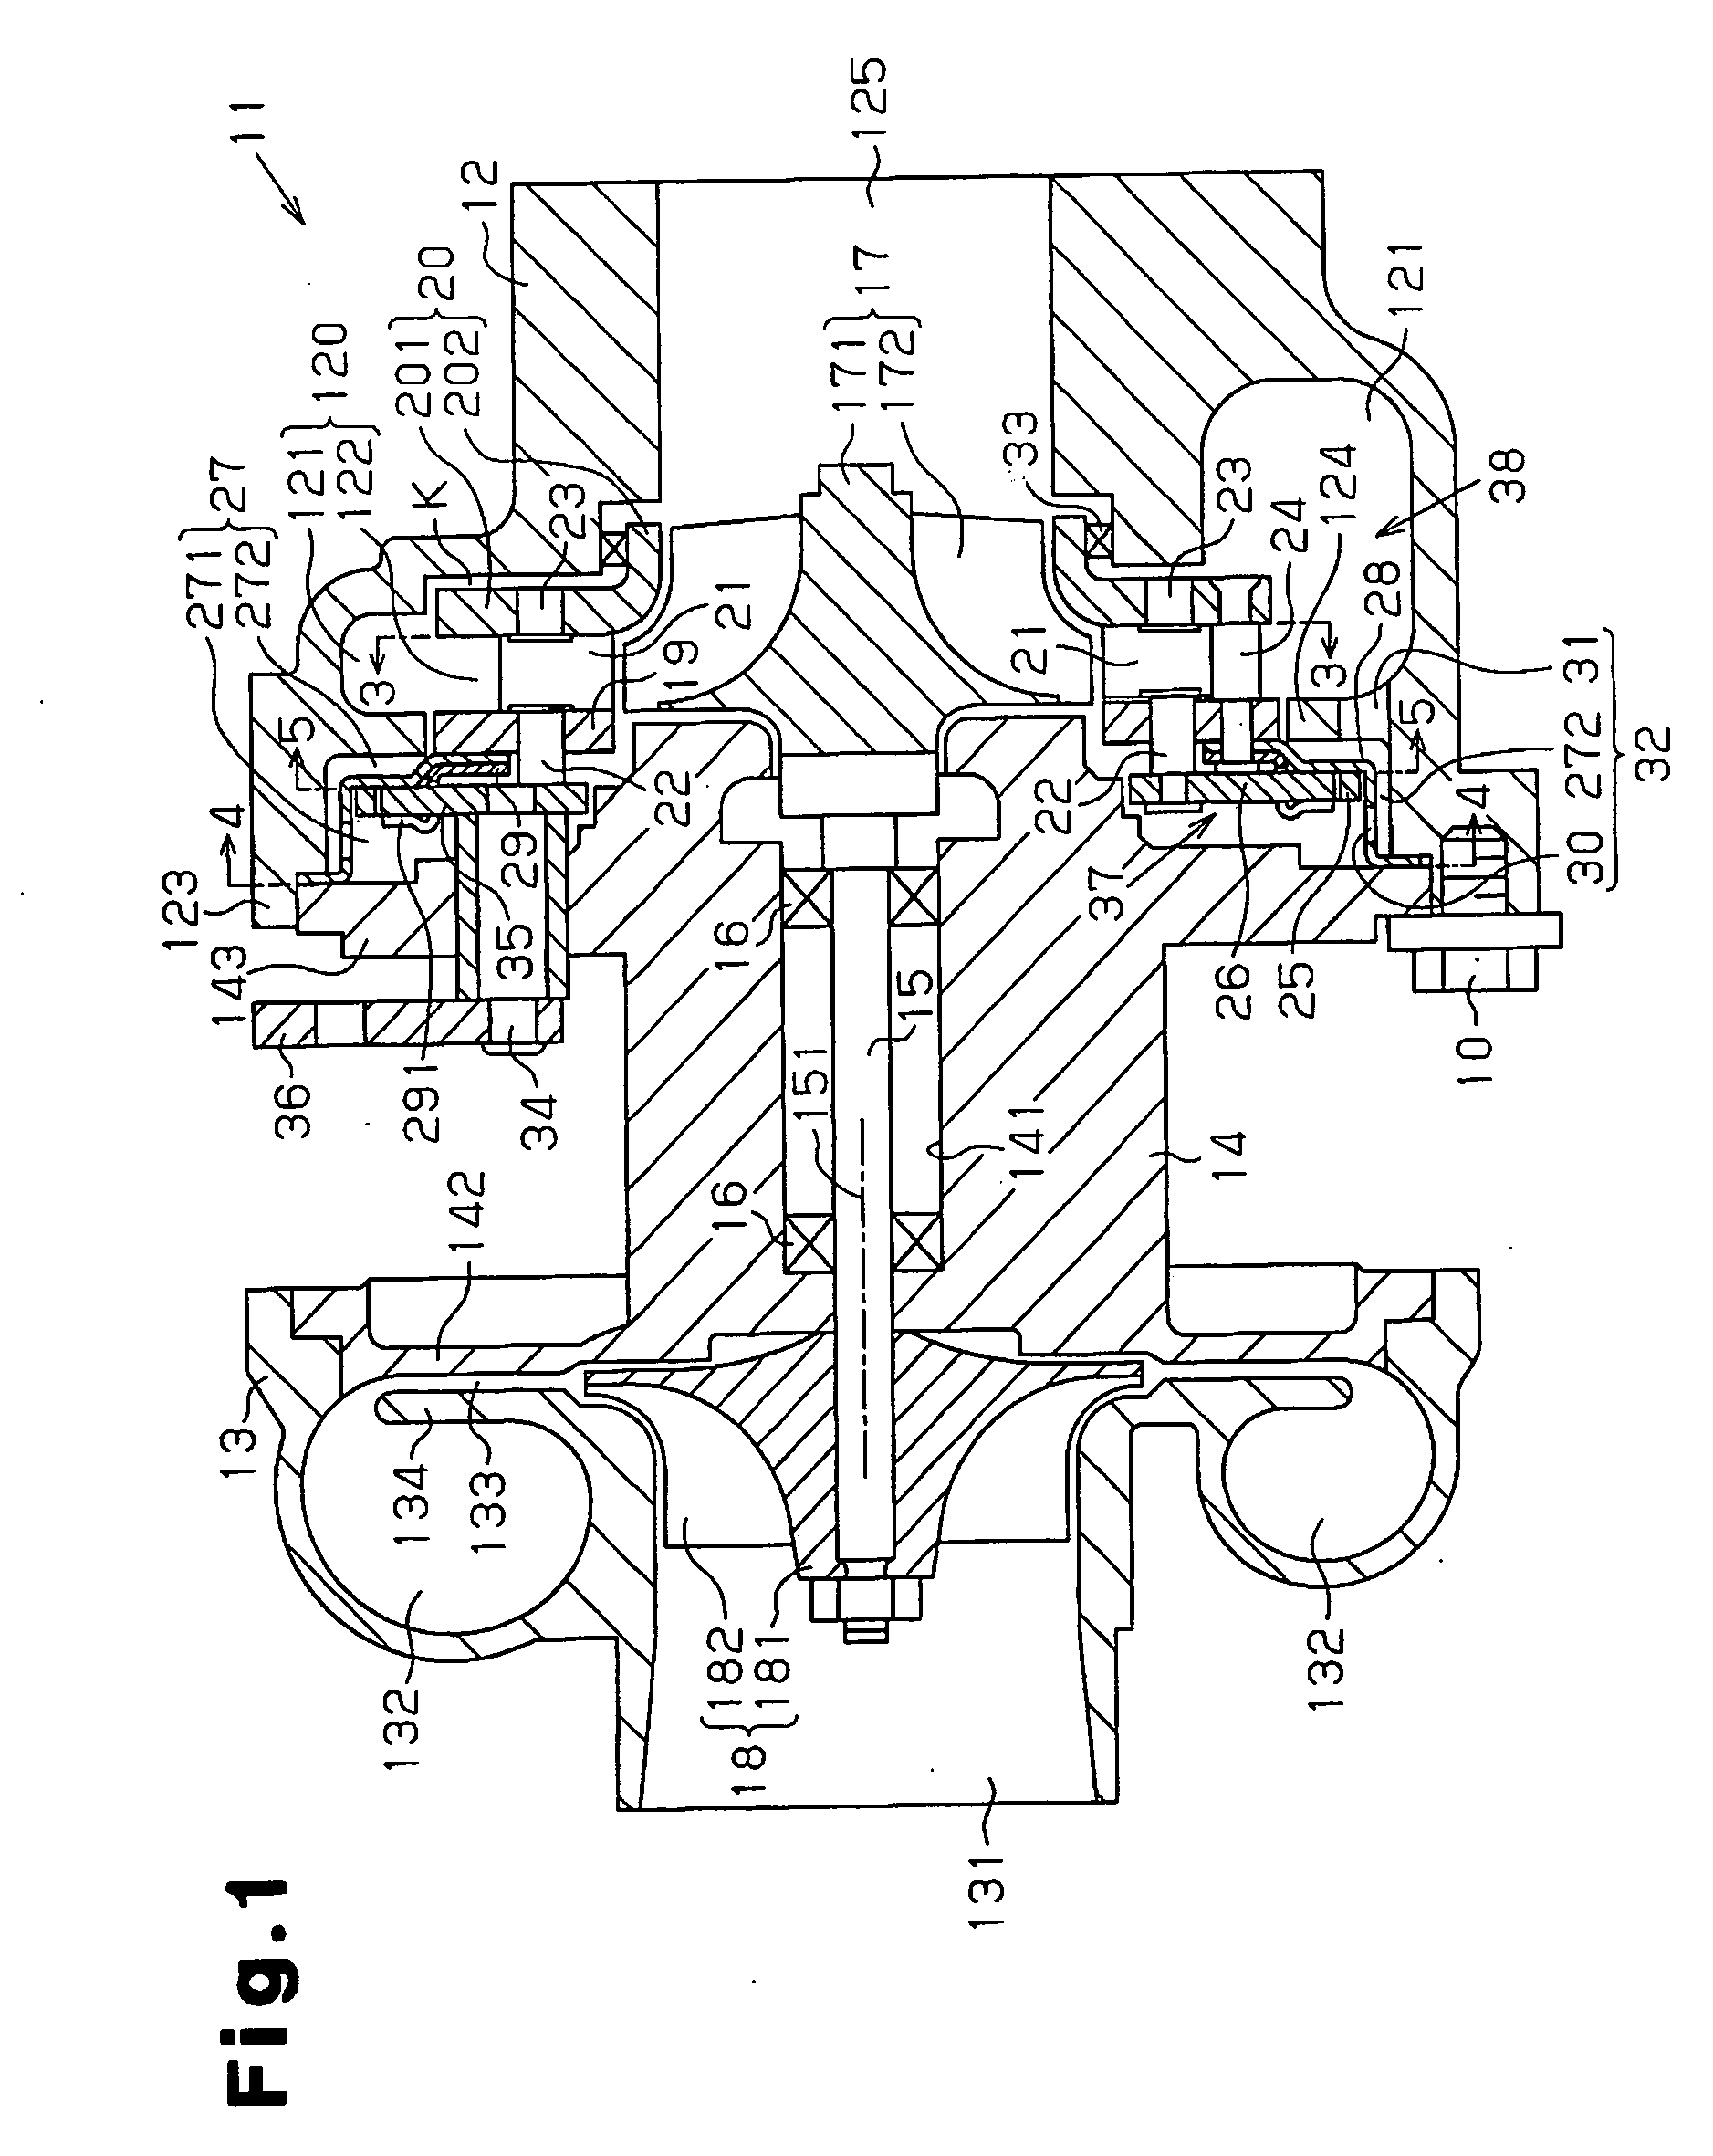 Turbocharger with variable nozzle mechanism